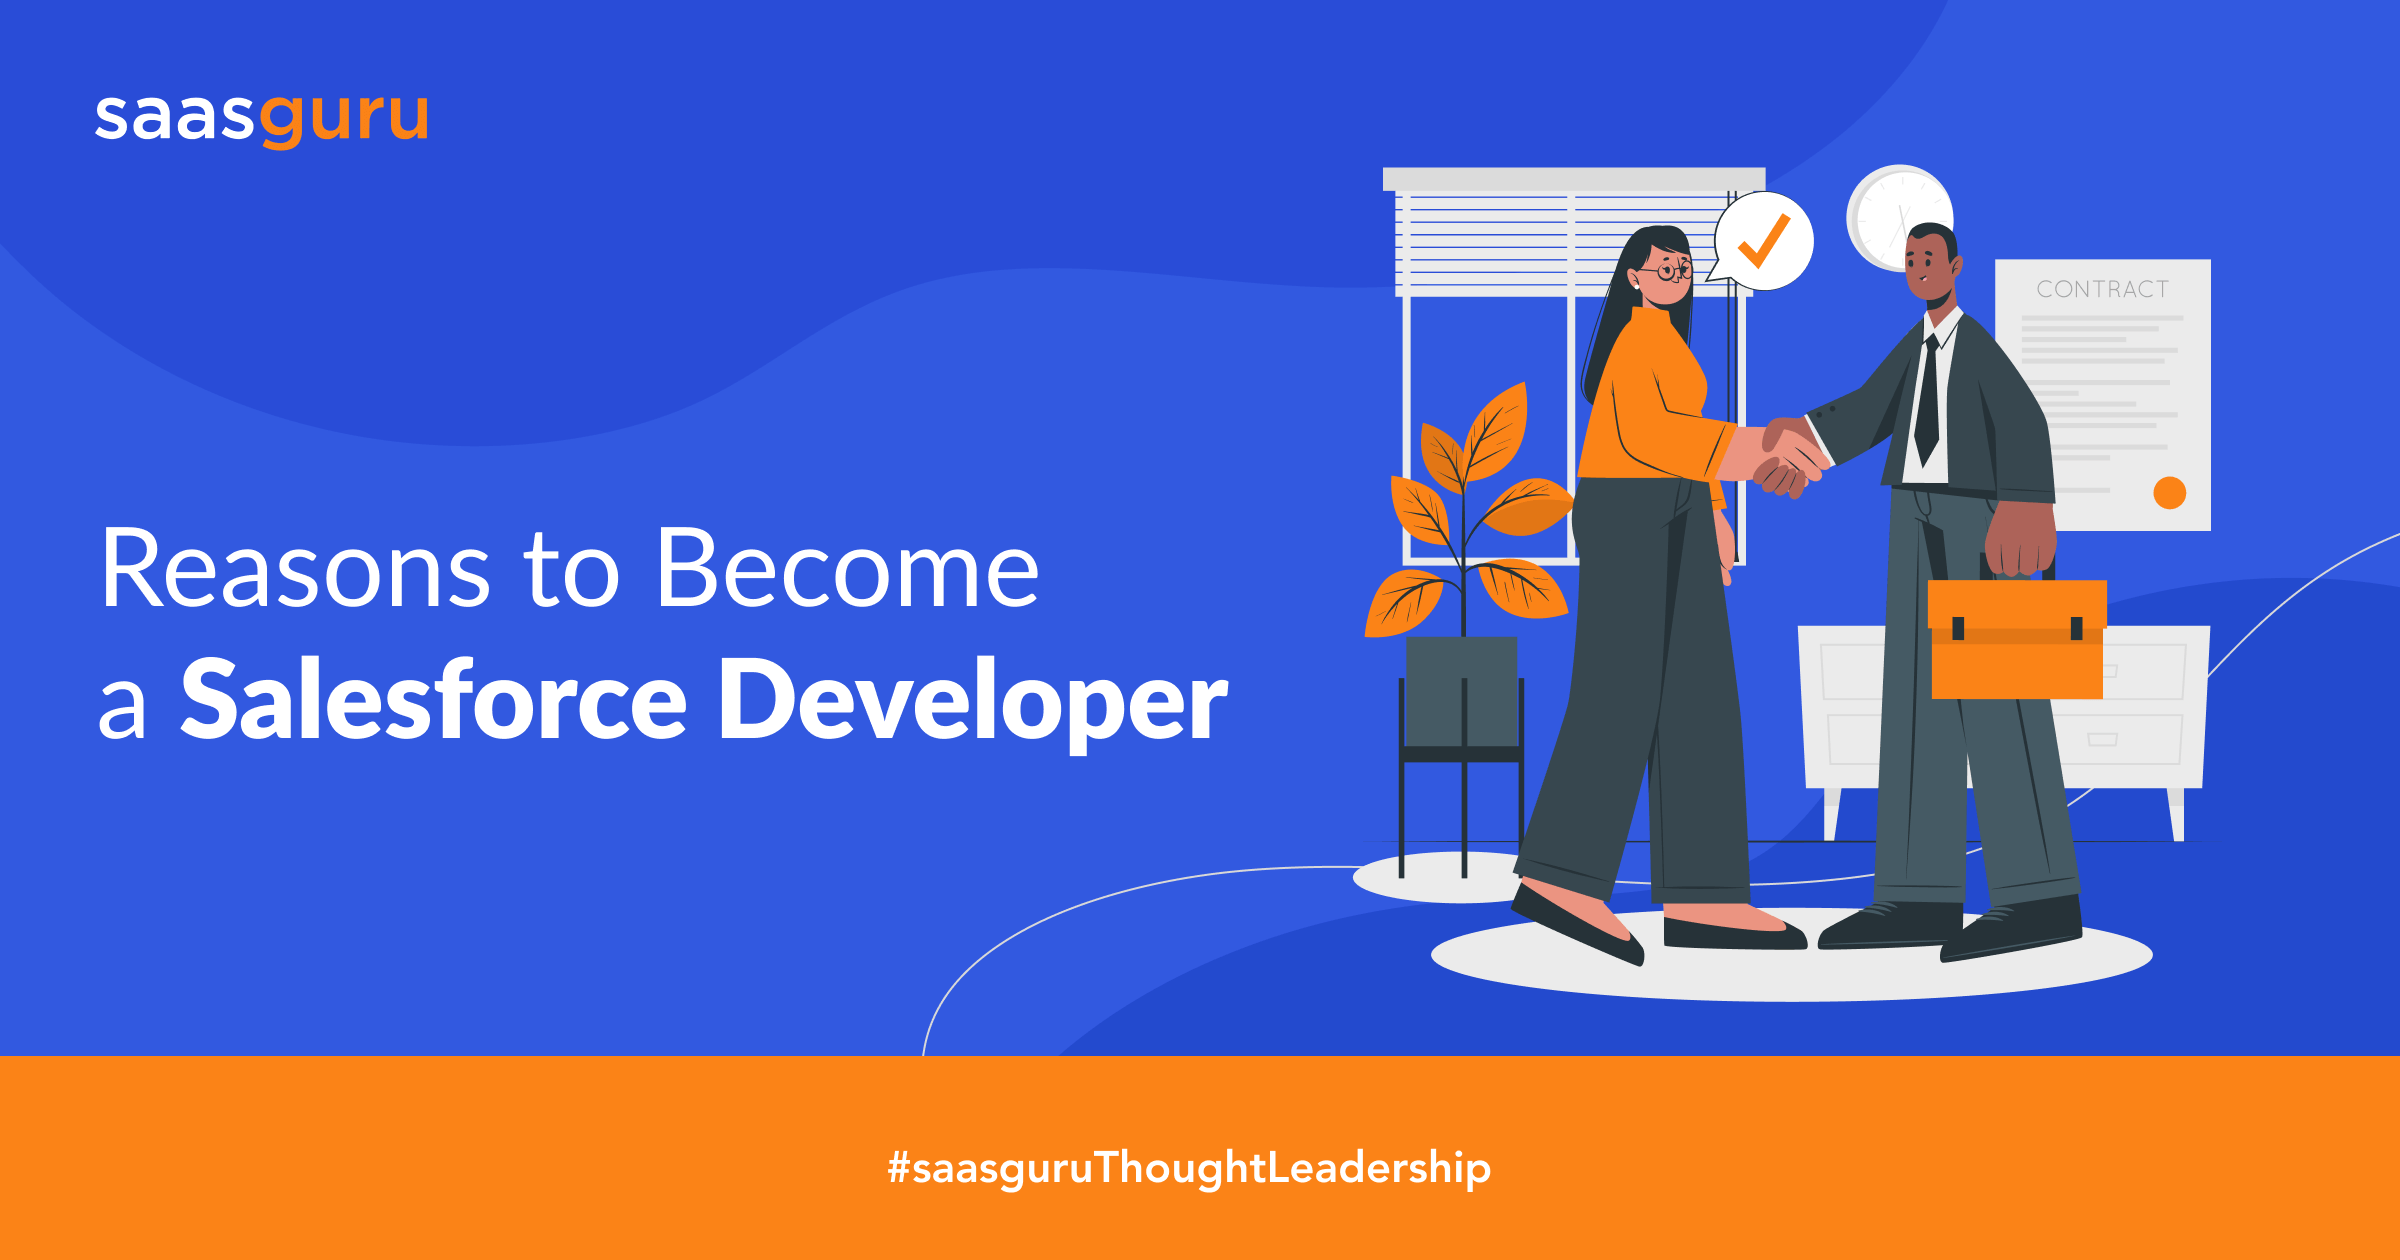 Reasons to Become a Salesforce Developer